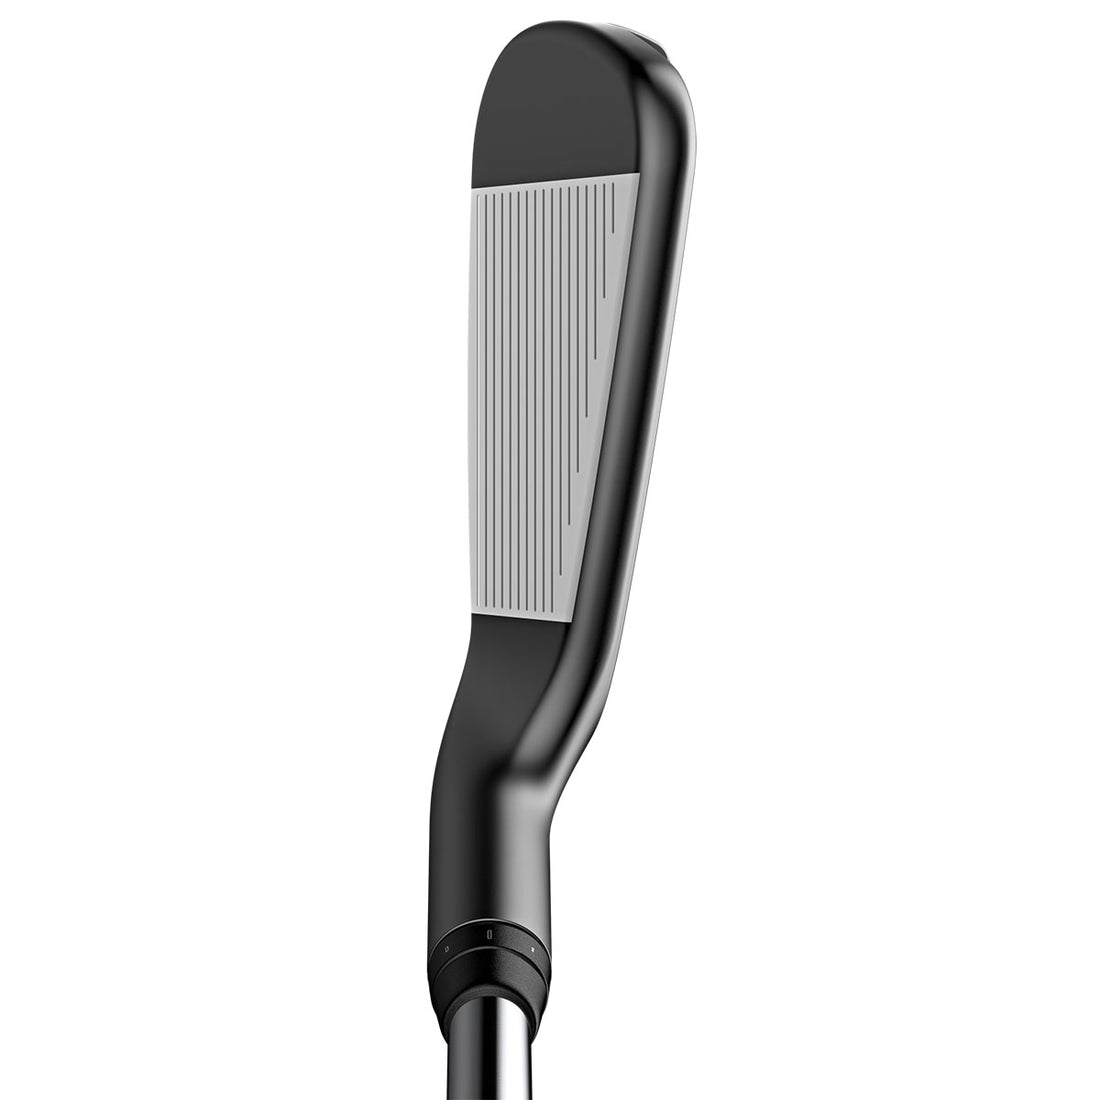 PING ICROSSOVER UTILITY IRON